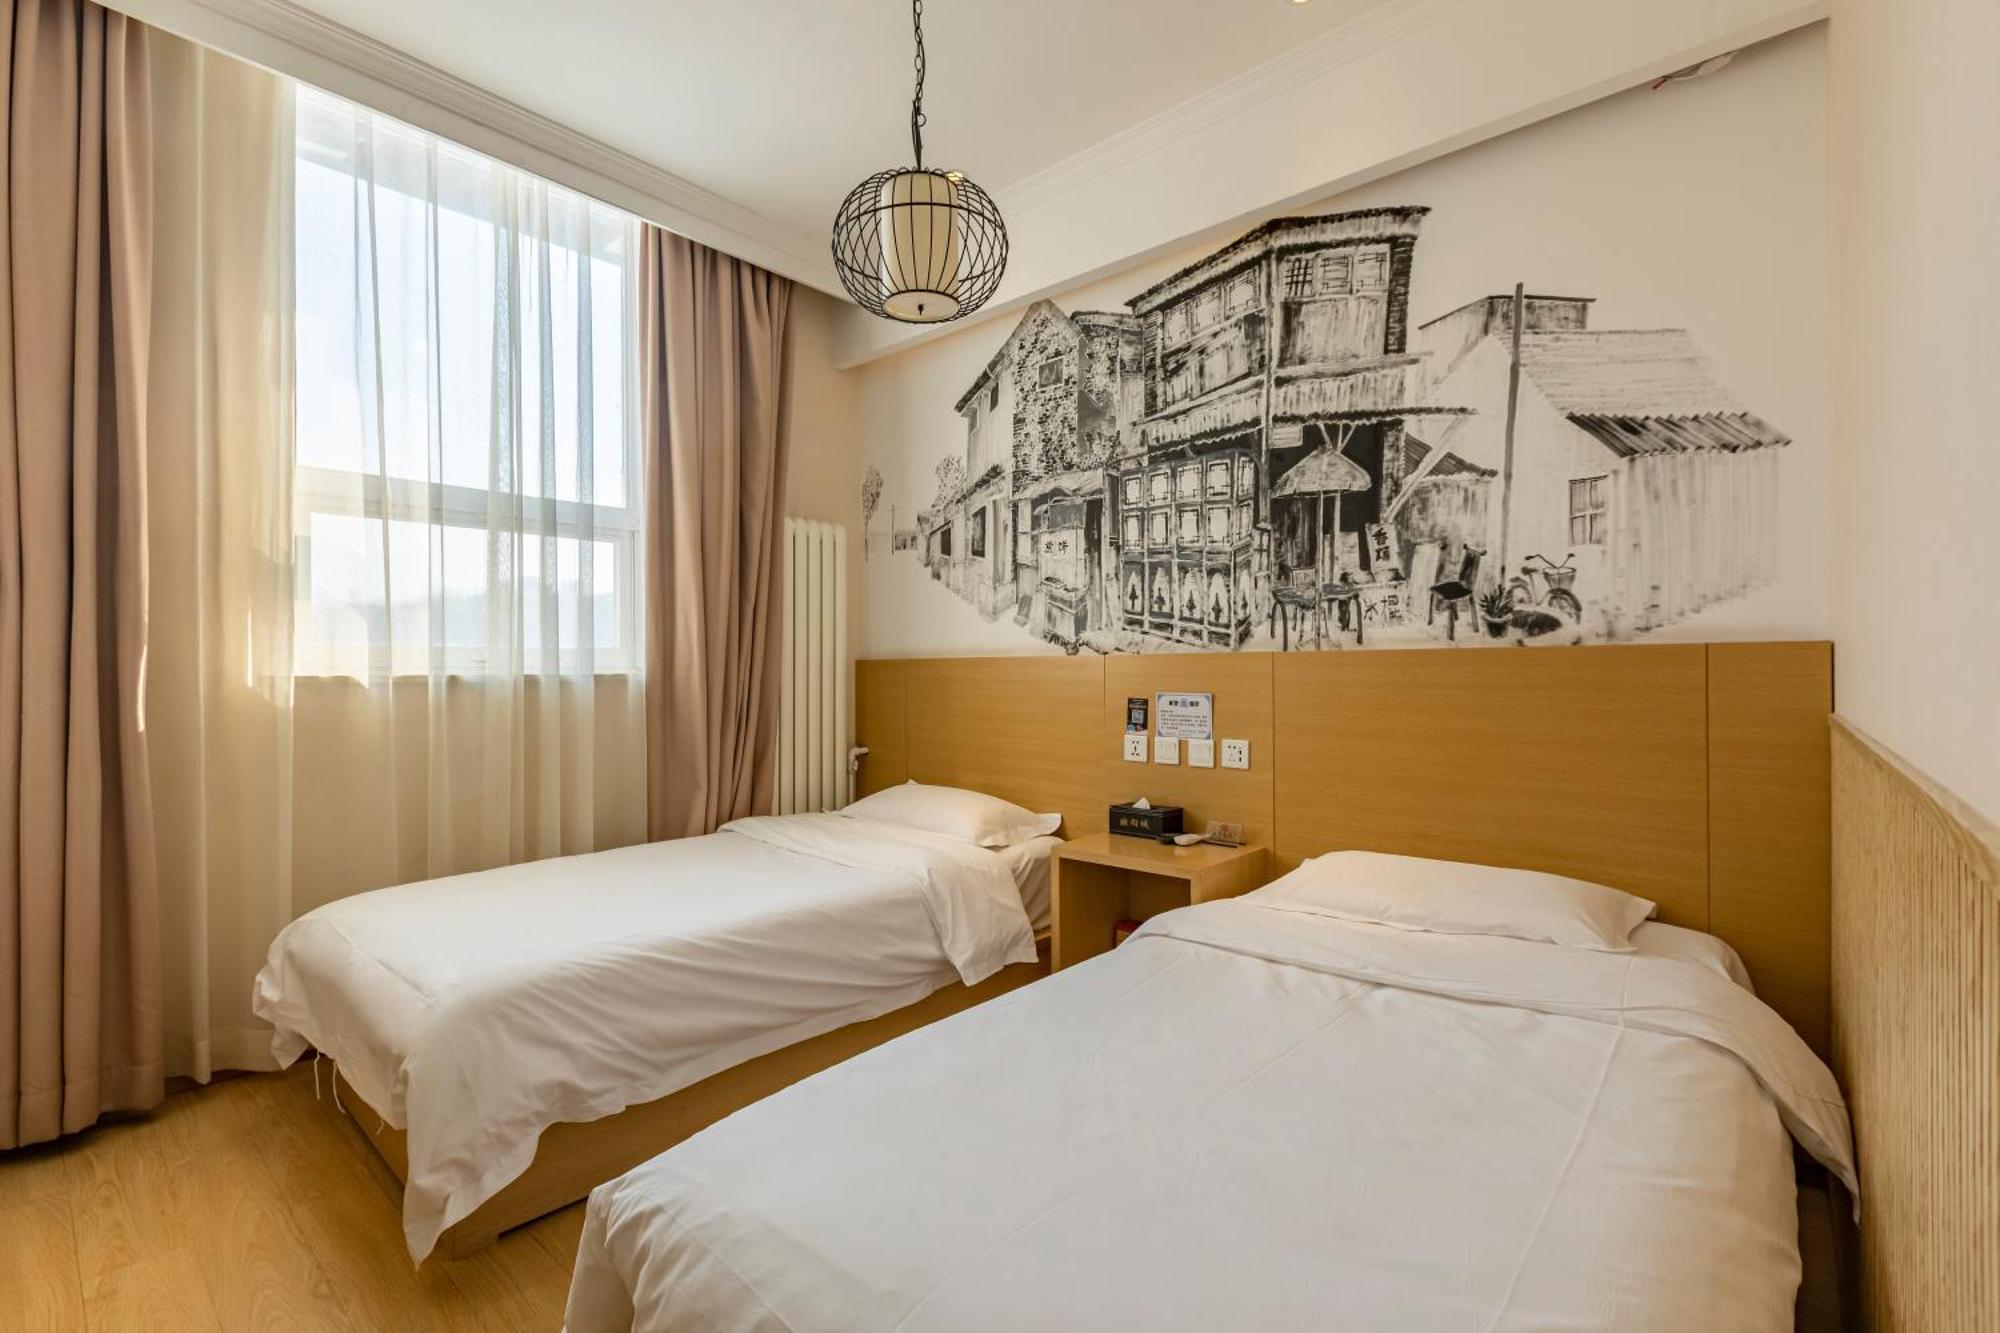 Happy Dragon Alley Hotel-In The City Center With Big Window&Free Coffe, Fluent English Speaking,Tourist Attractions Ticket Service&Food Recommendation,Near Tian Anmen Forbiddencity,Near Lama Temple,Easy To Walk To Nanluoalley&Shichahai Peking Exterior foto